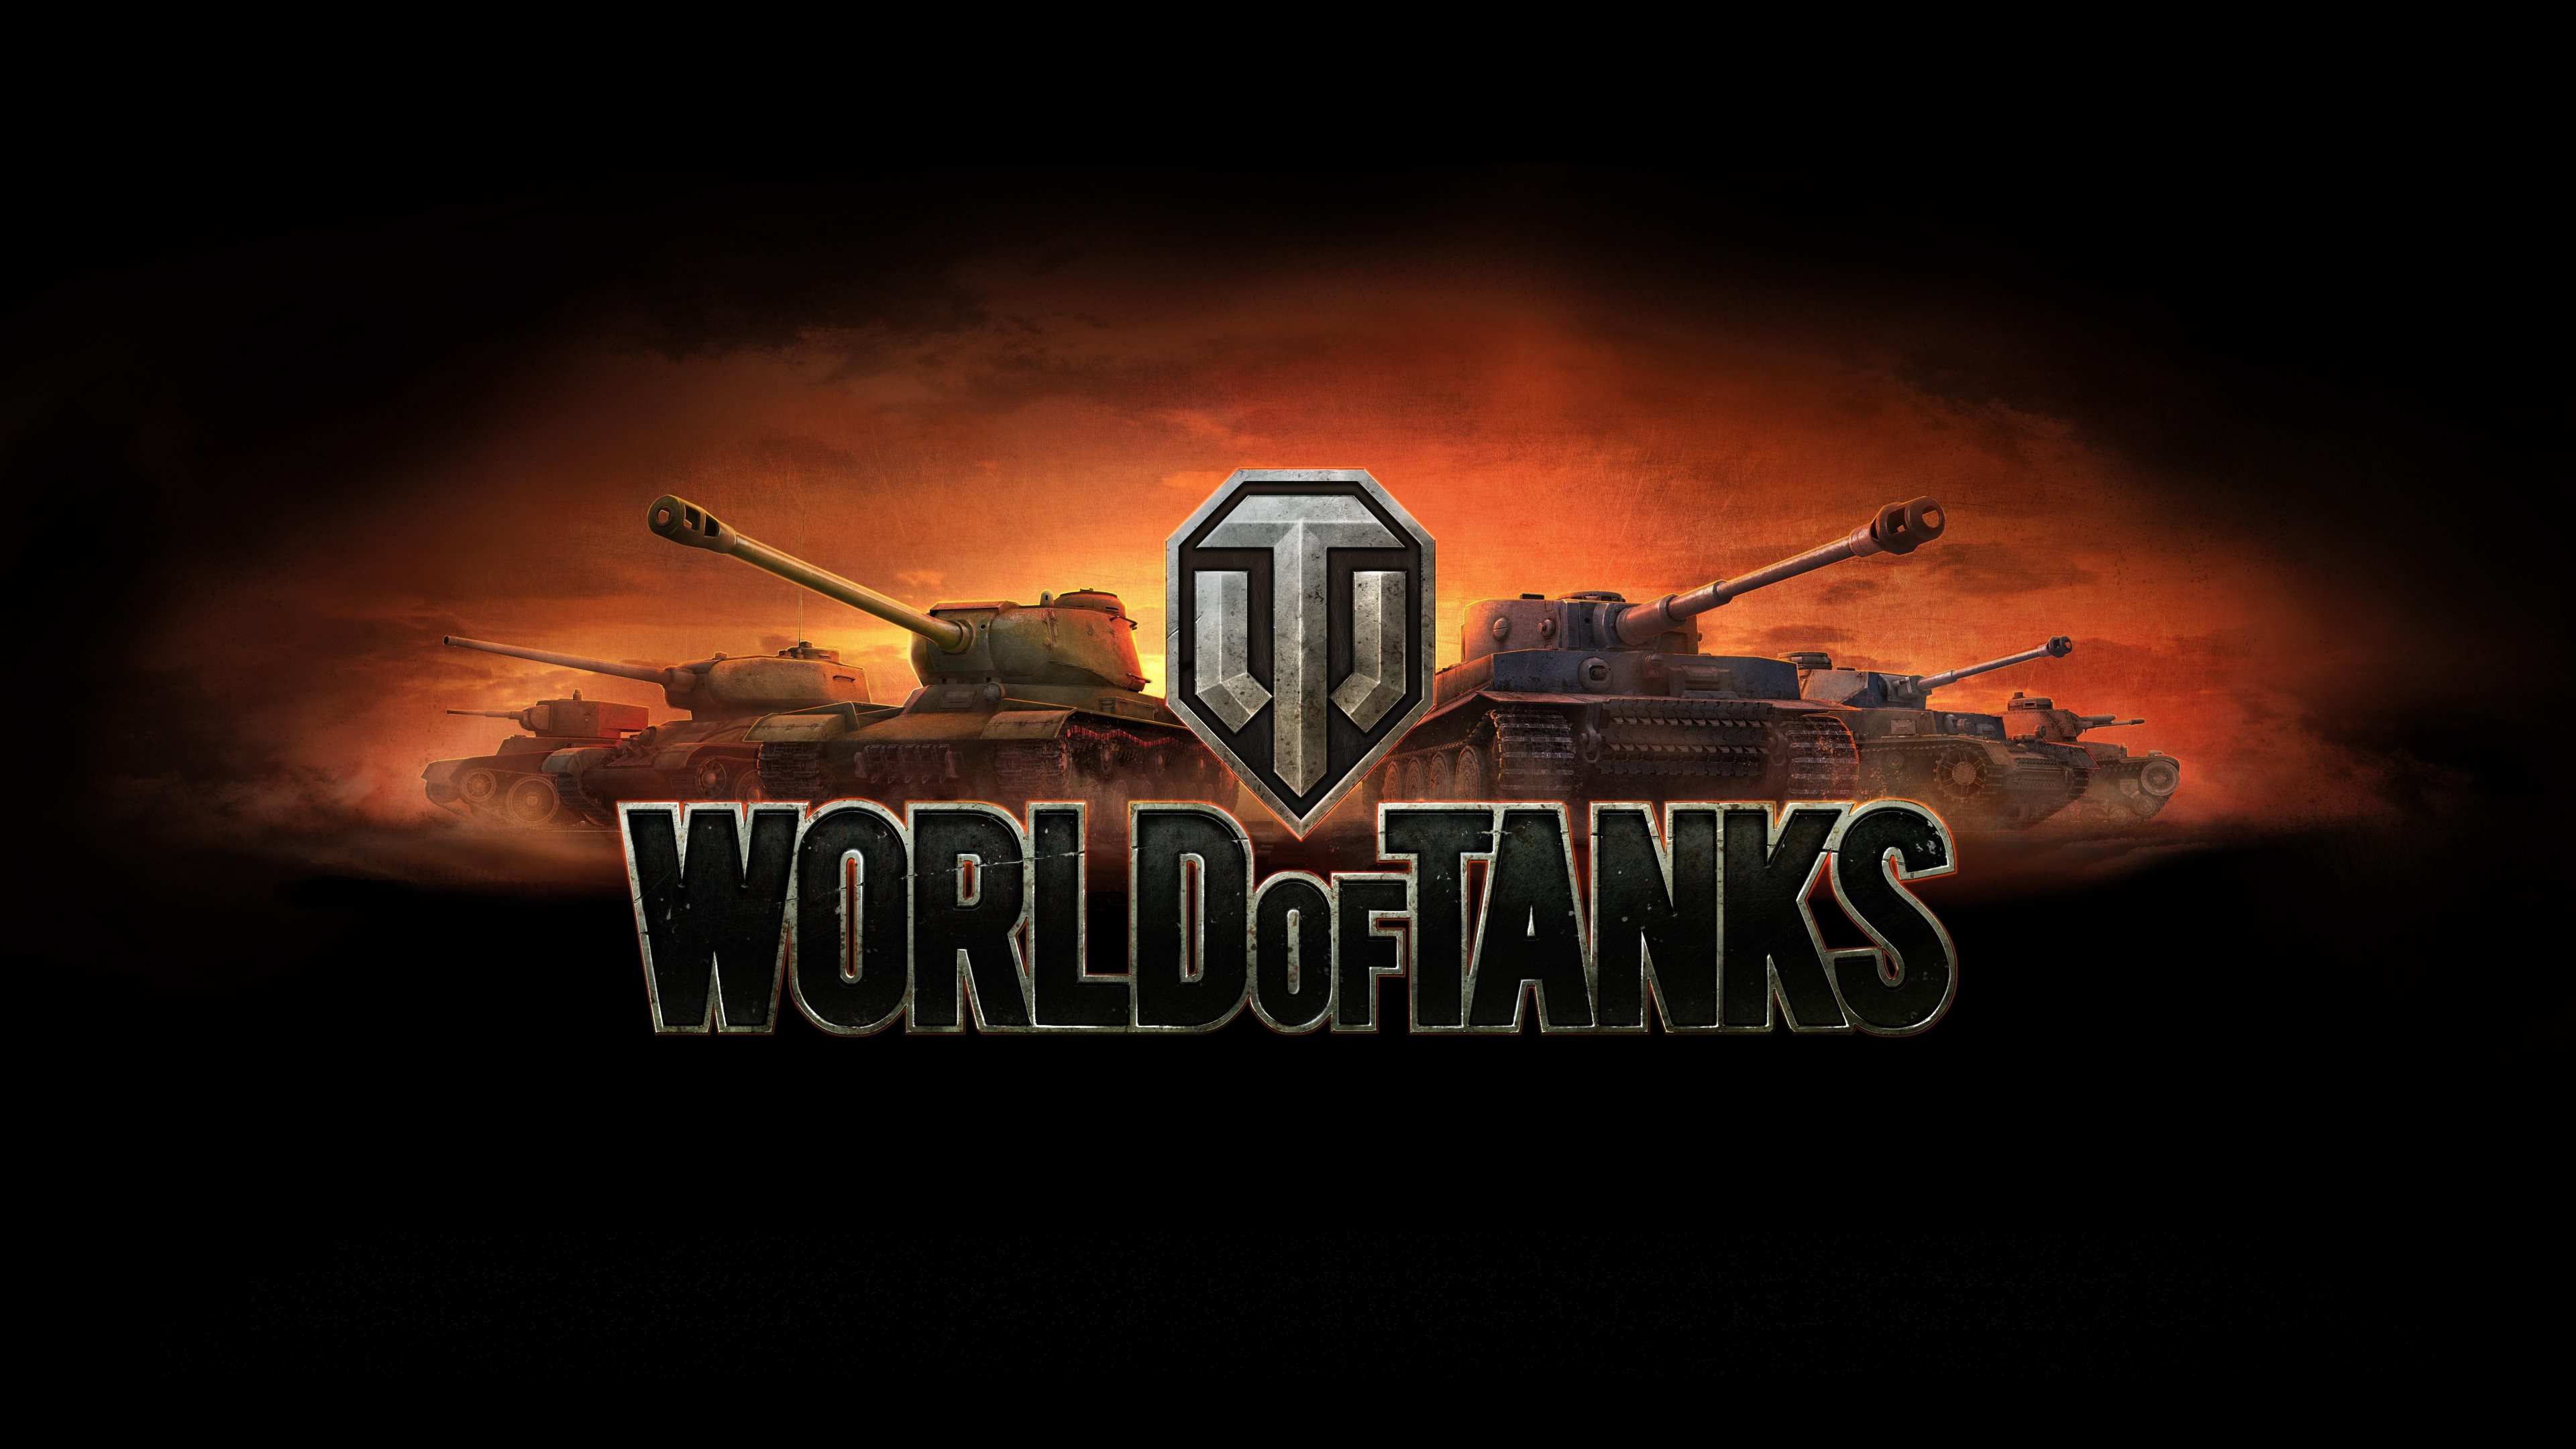 World of Tanks Wallpapers Pictures Images